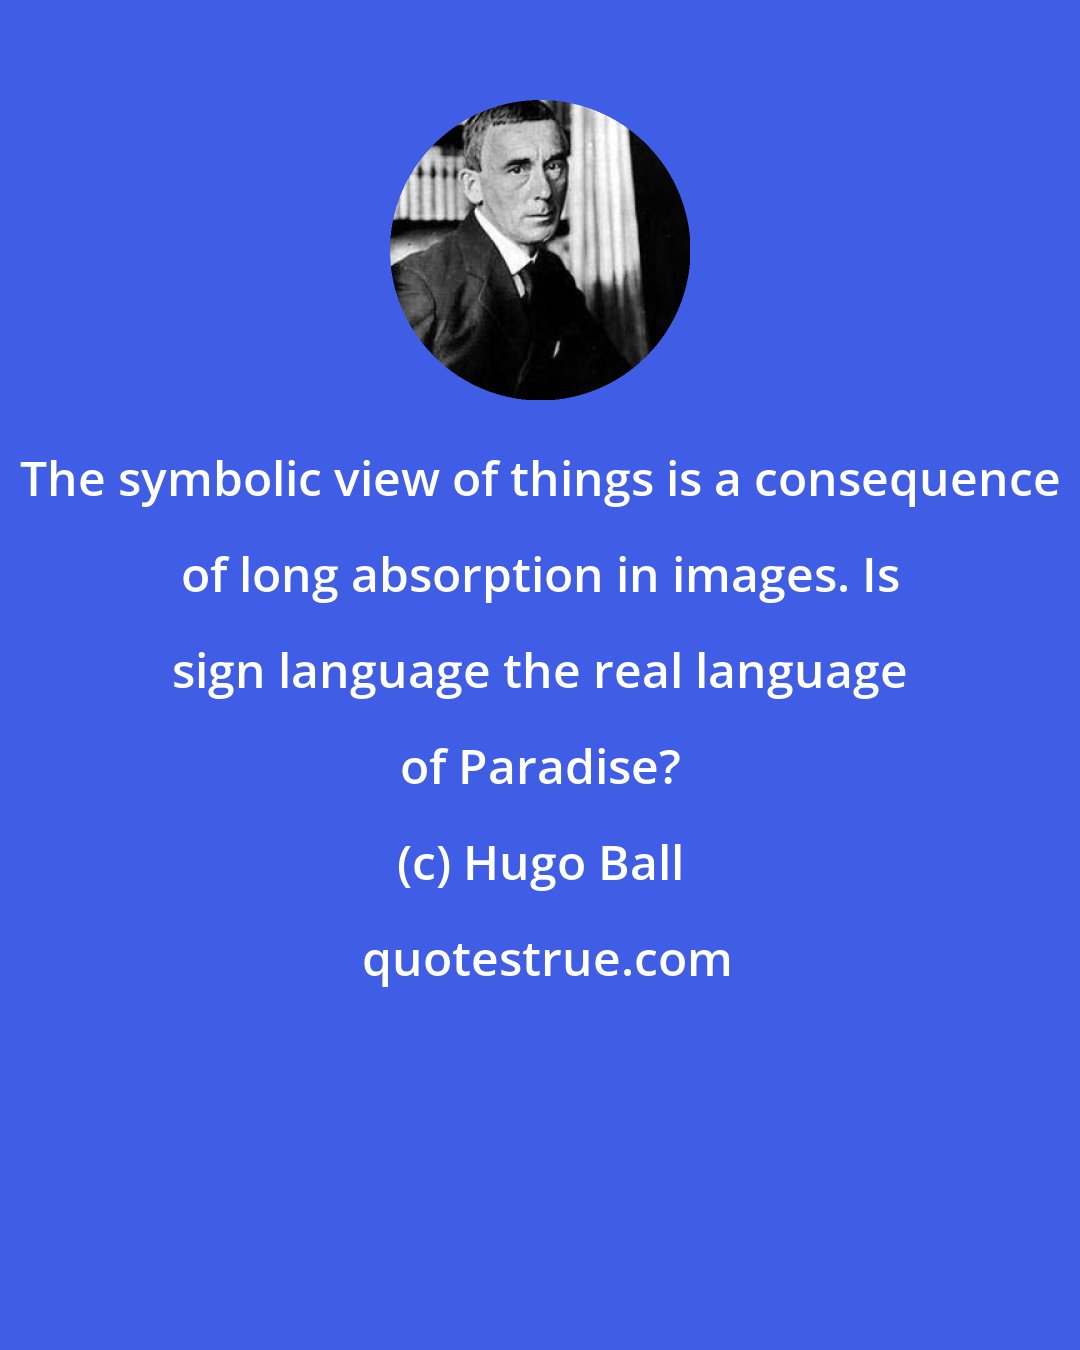 Hugo Ball: The symbolic view of things is a consequence of long absorption in images. Is sign language the real language of Paradise?